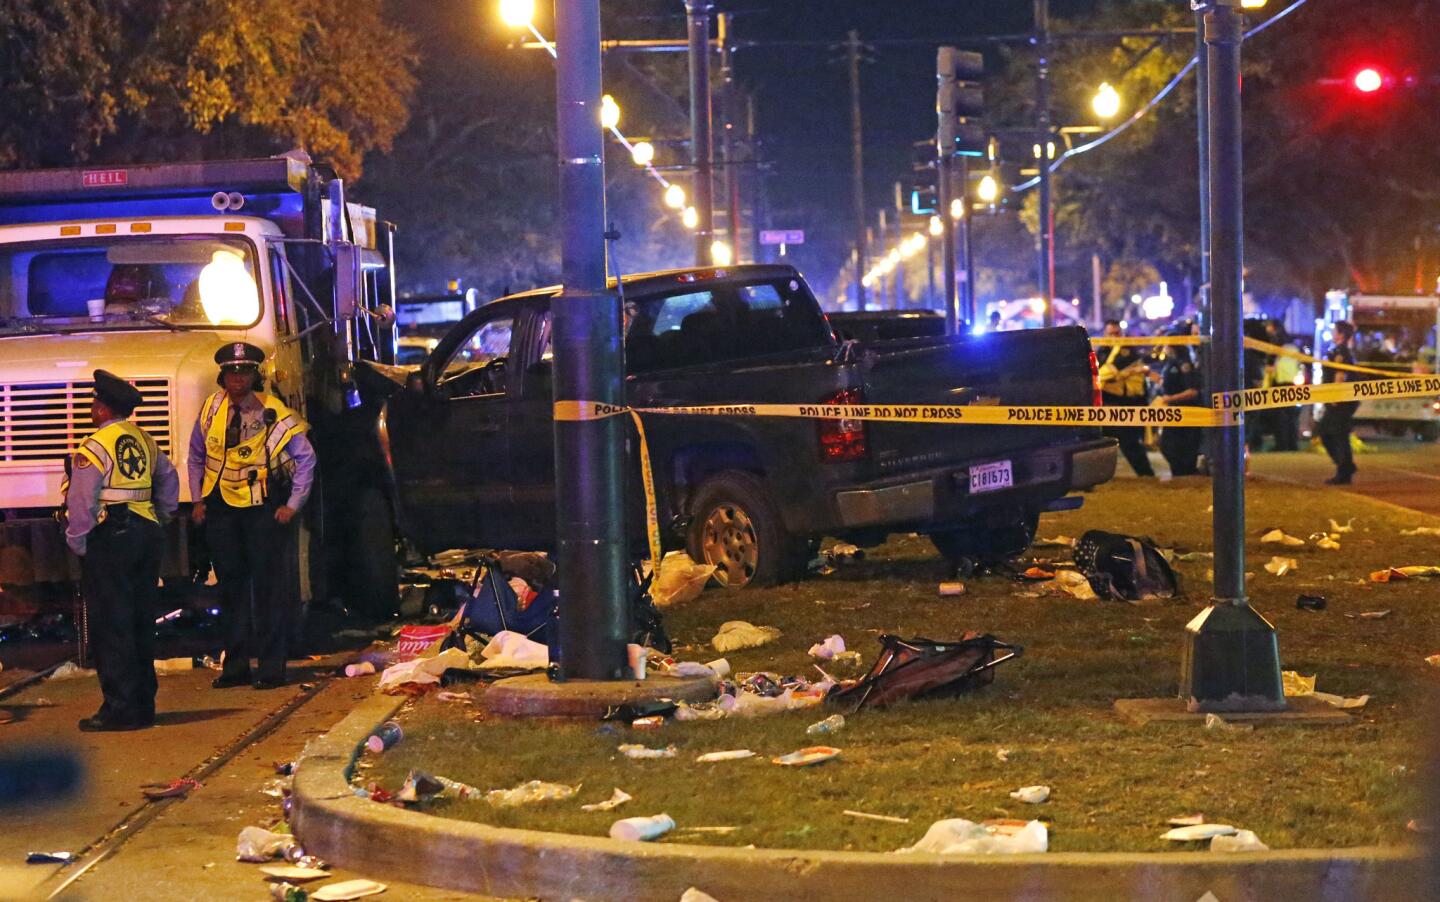 Police stand next to a pickup truck that slammed into a crowd and other vehicles, causing multiple injuries, during the Krewe of Endymion parade in New Orleans on Feb. 25, 2017.